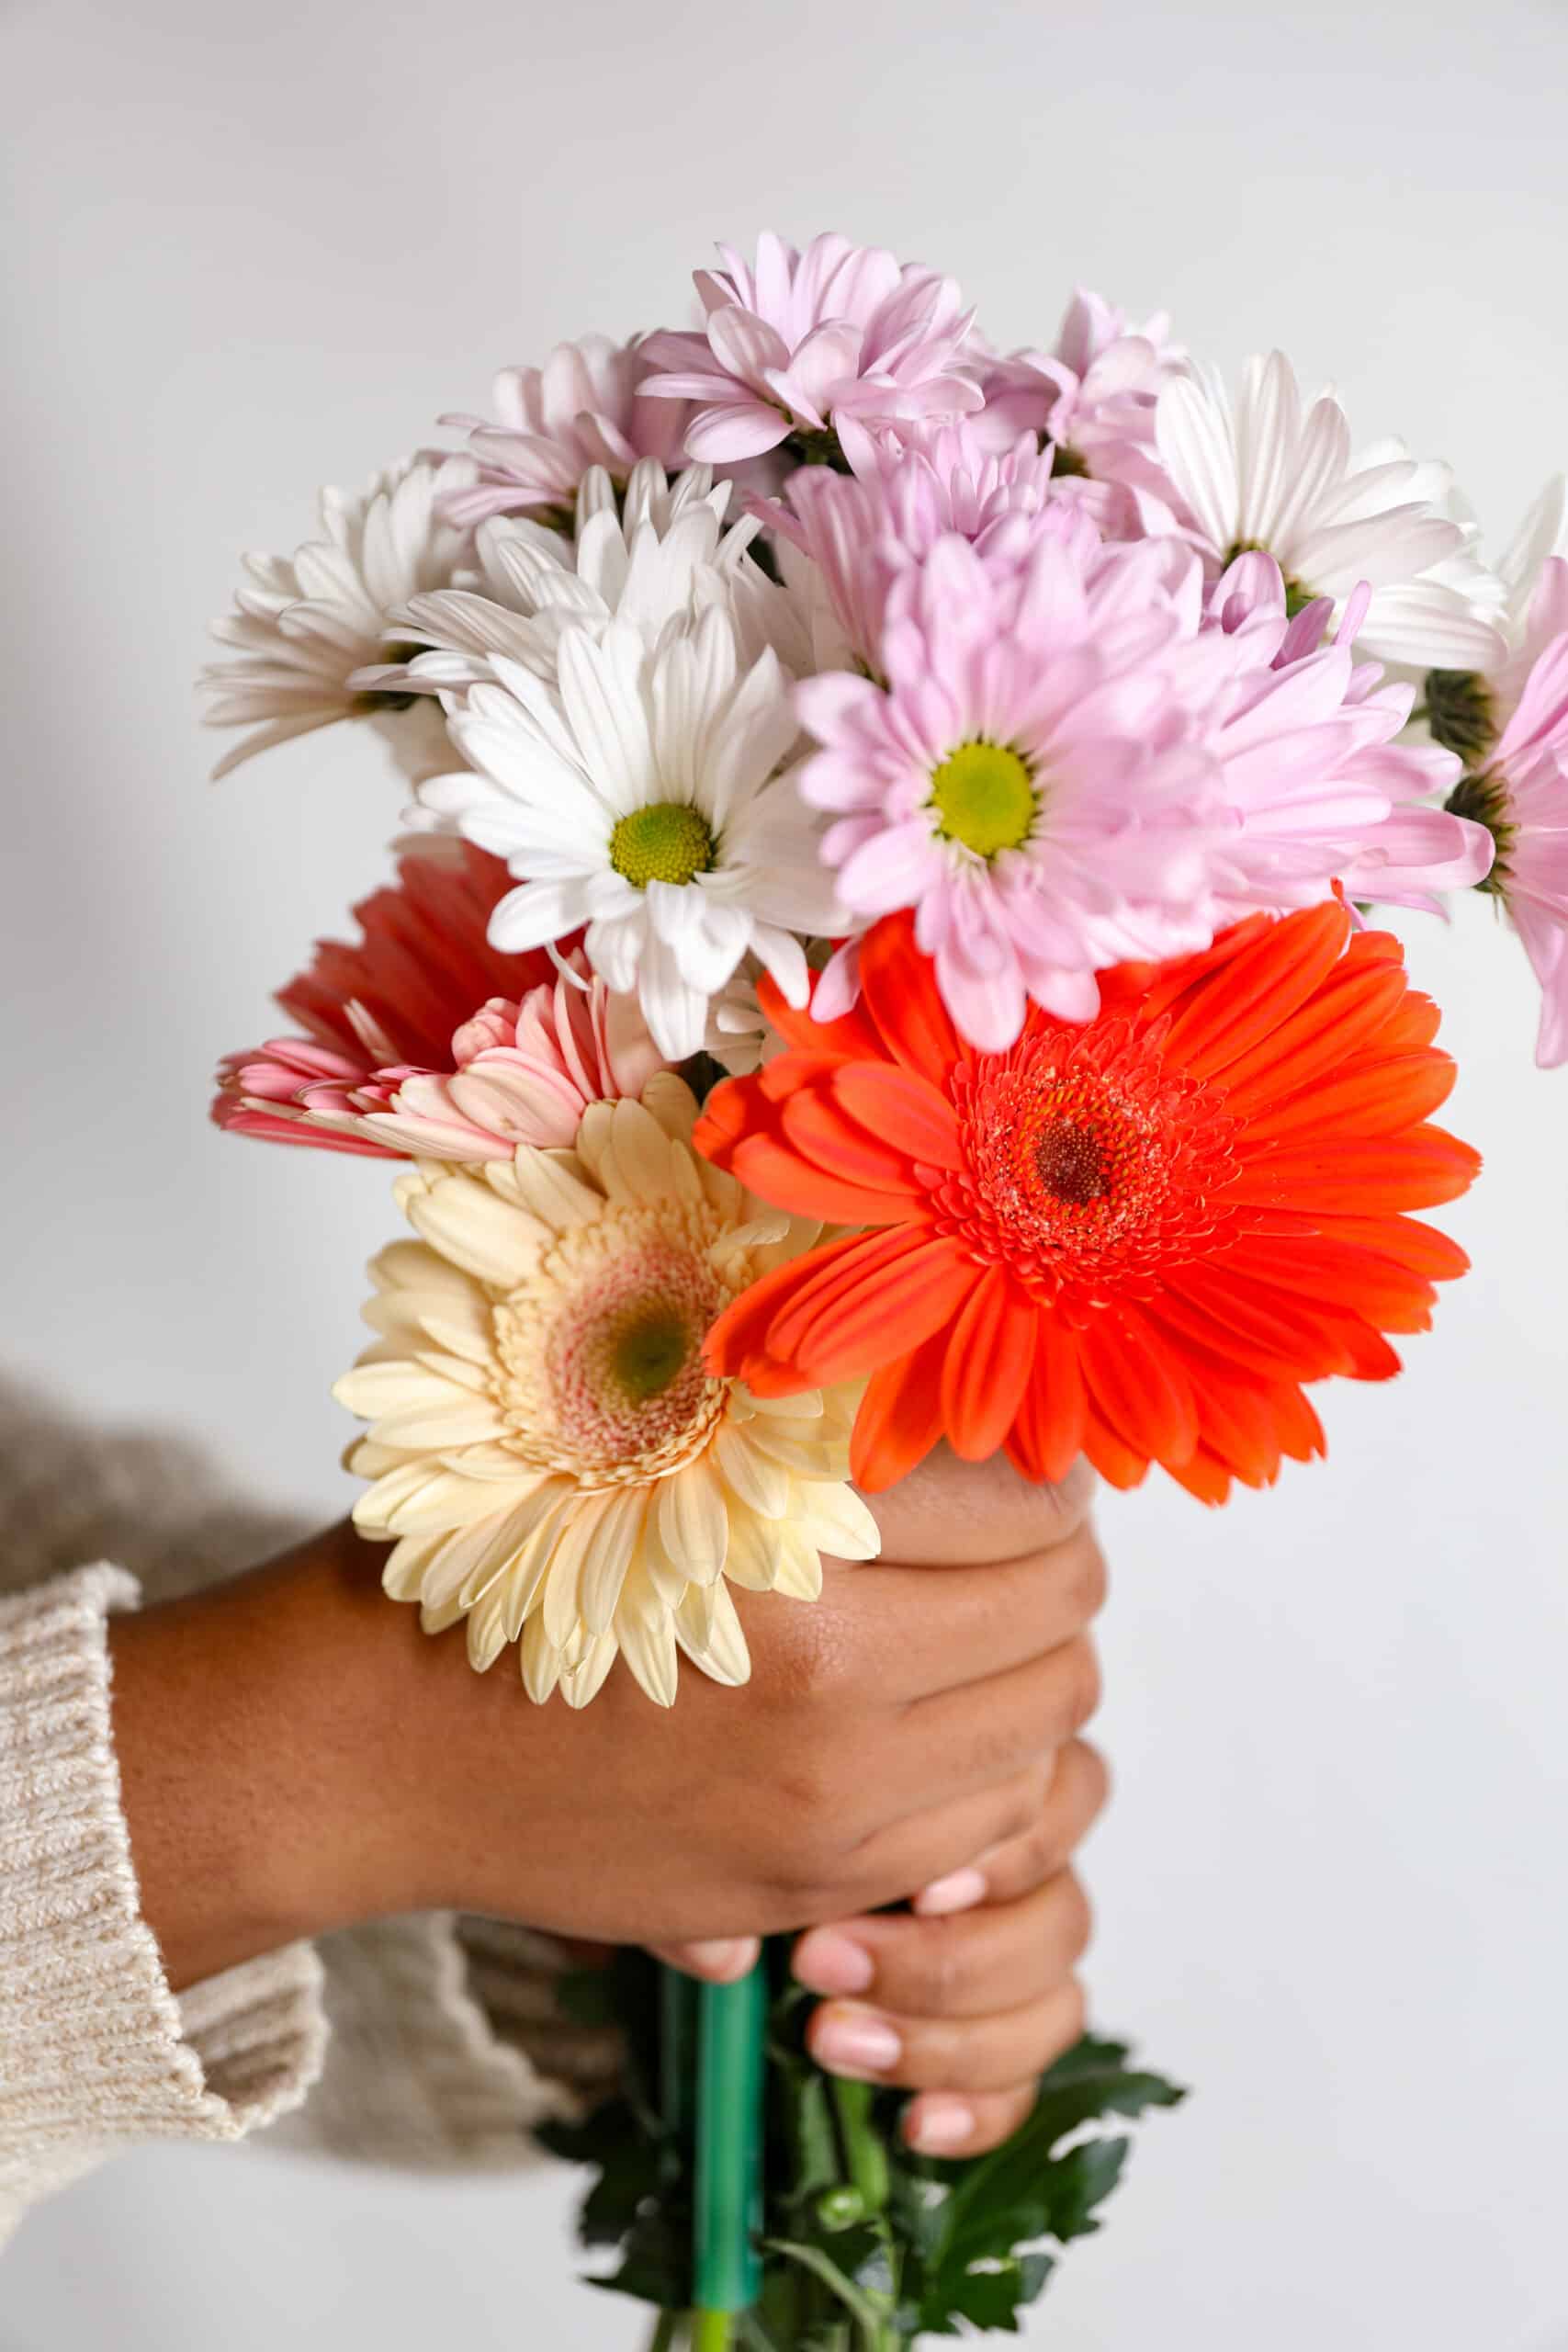 a hand holding a bouquet of daisies and gerberas